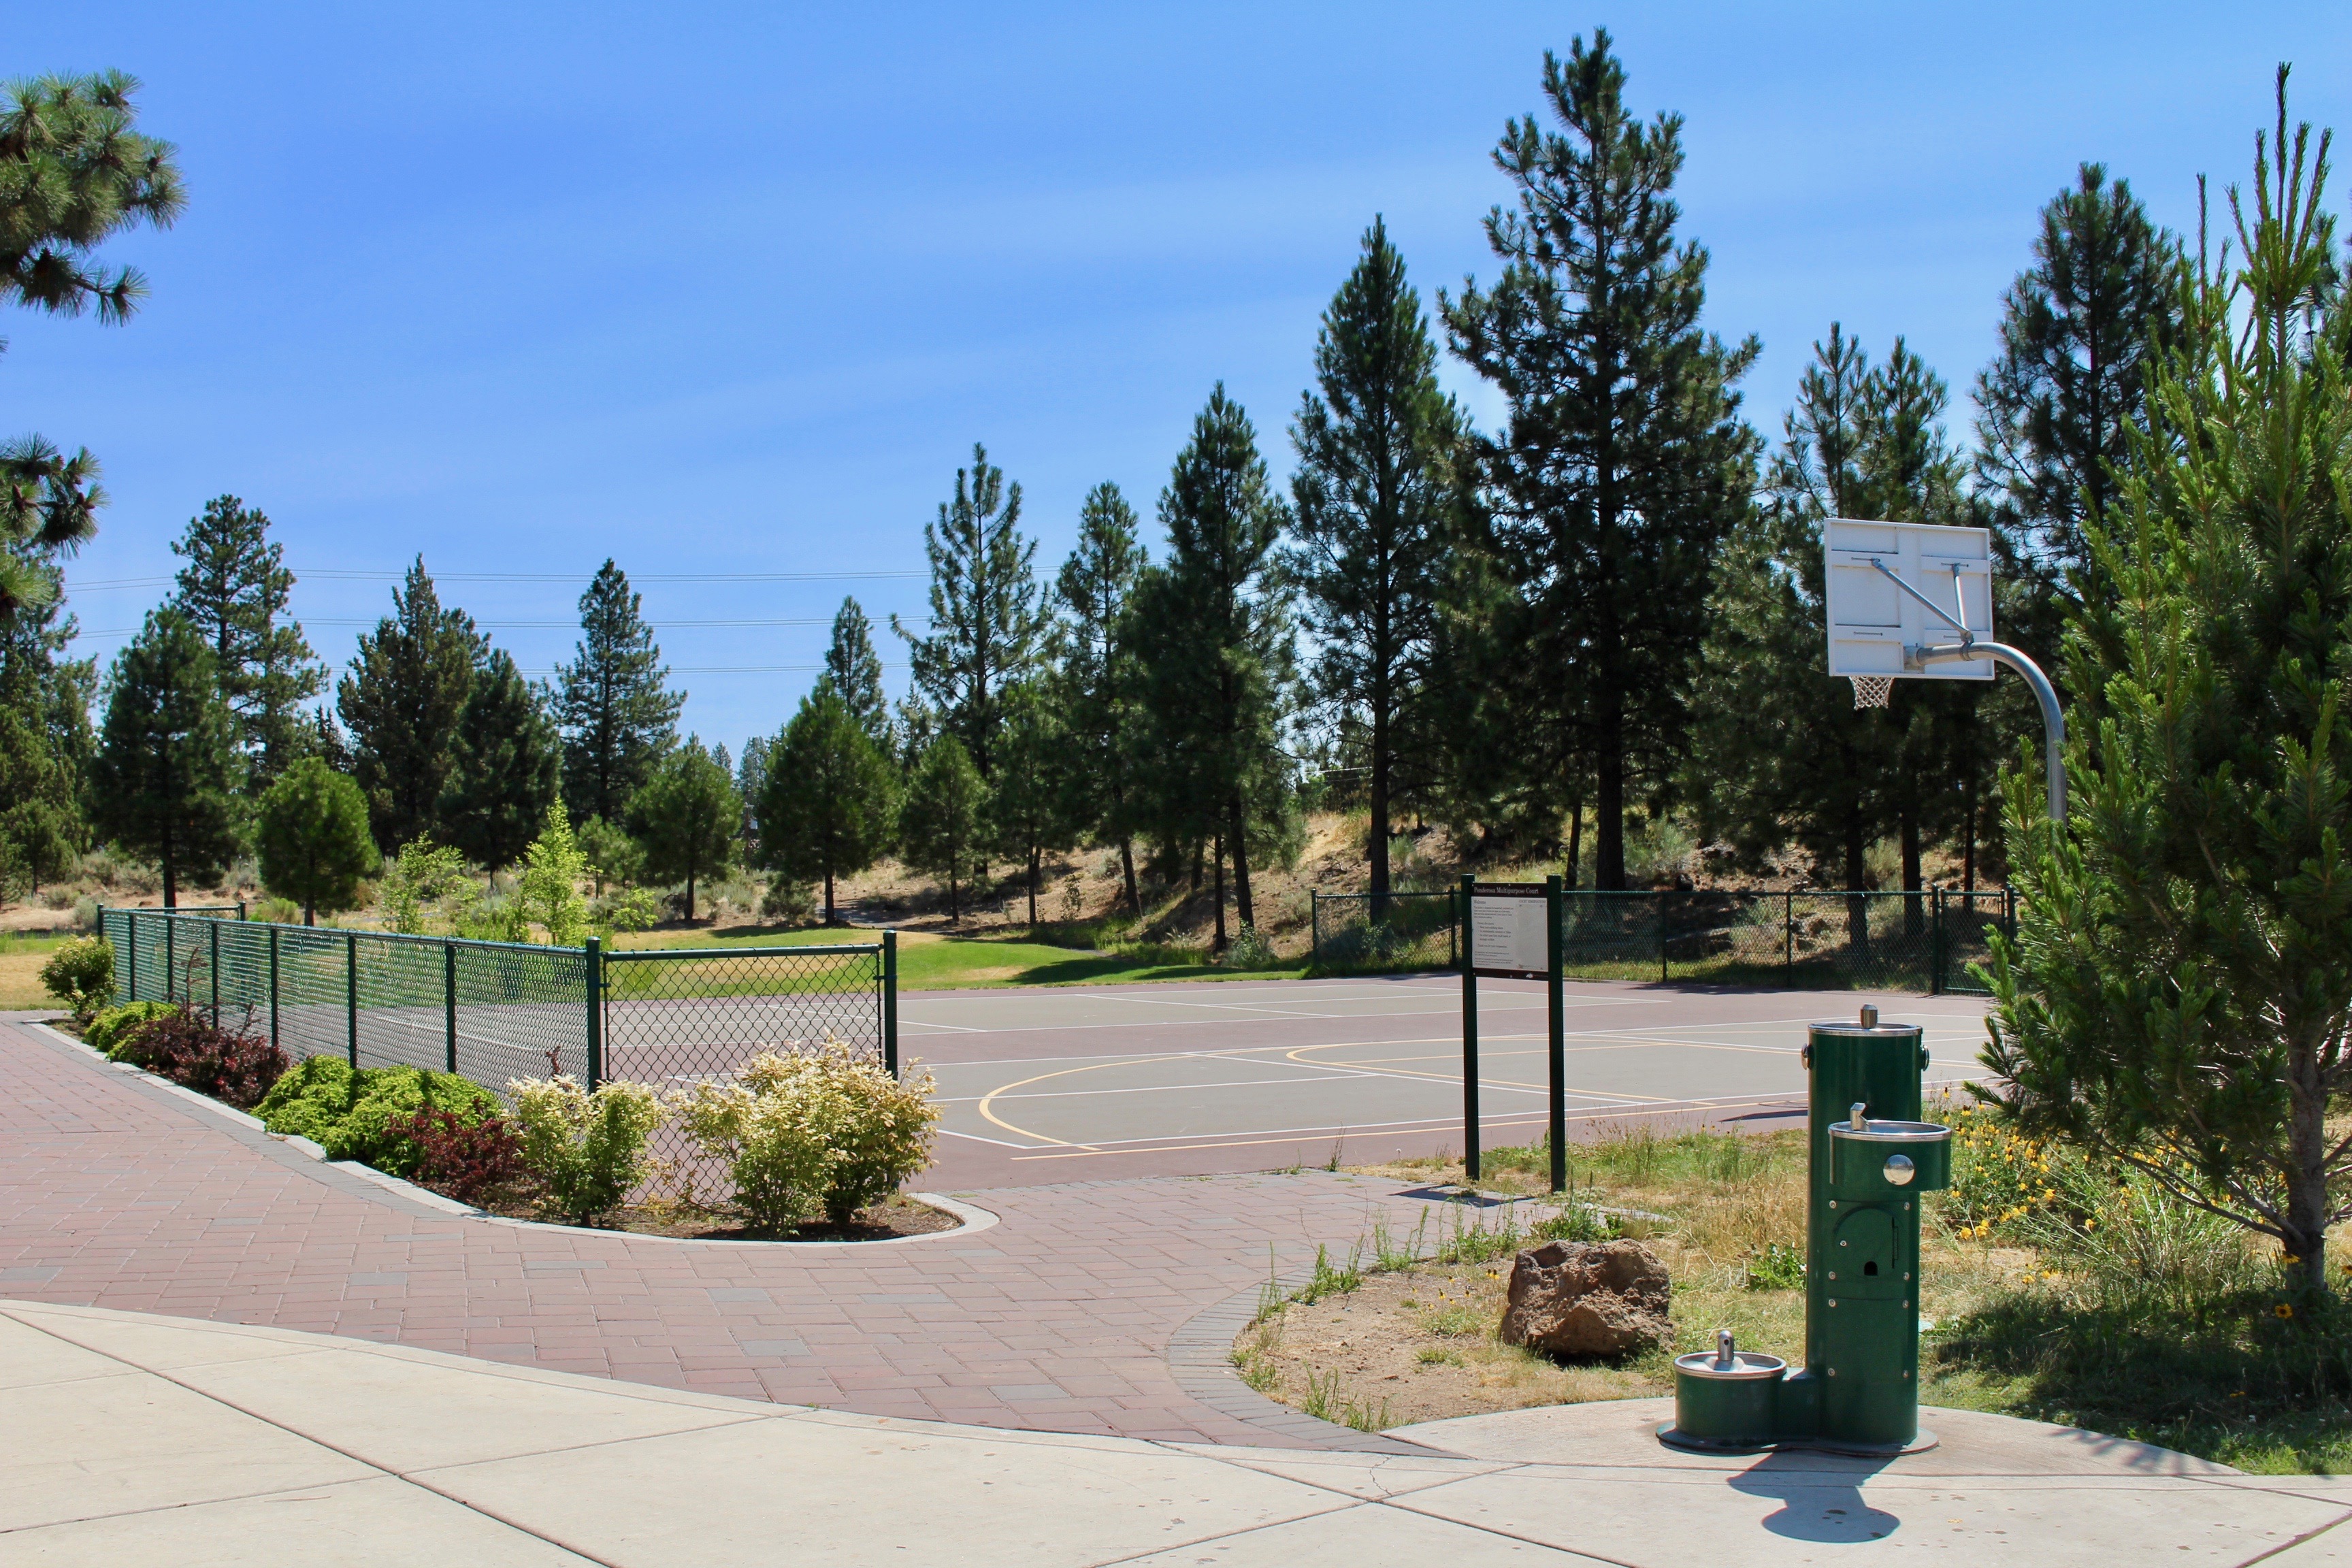 the combined basketball and pickleball court at ponderosa